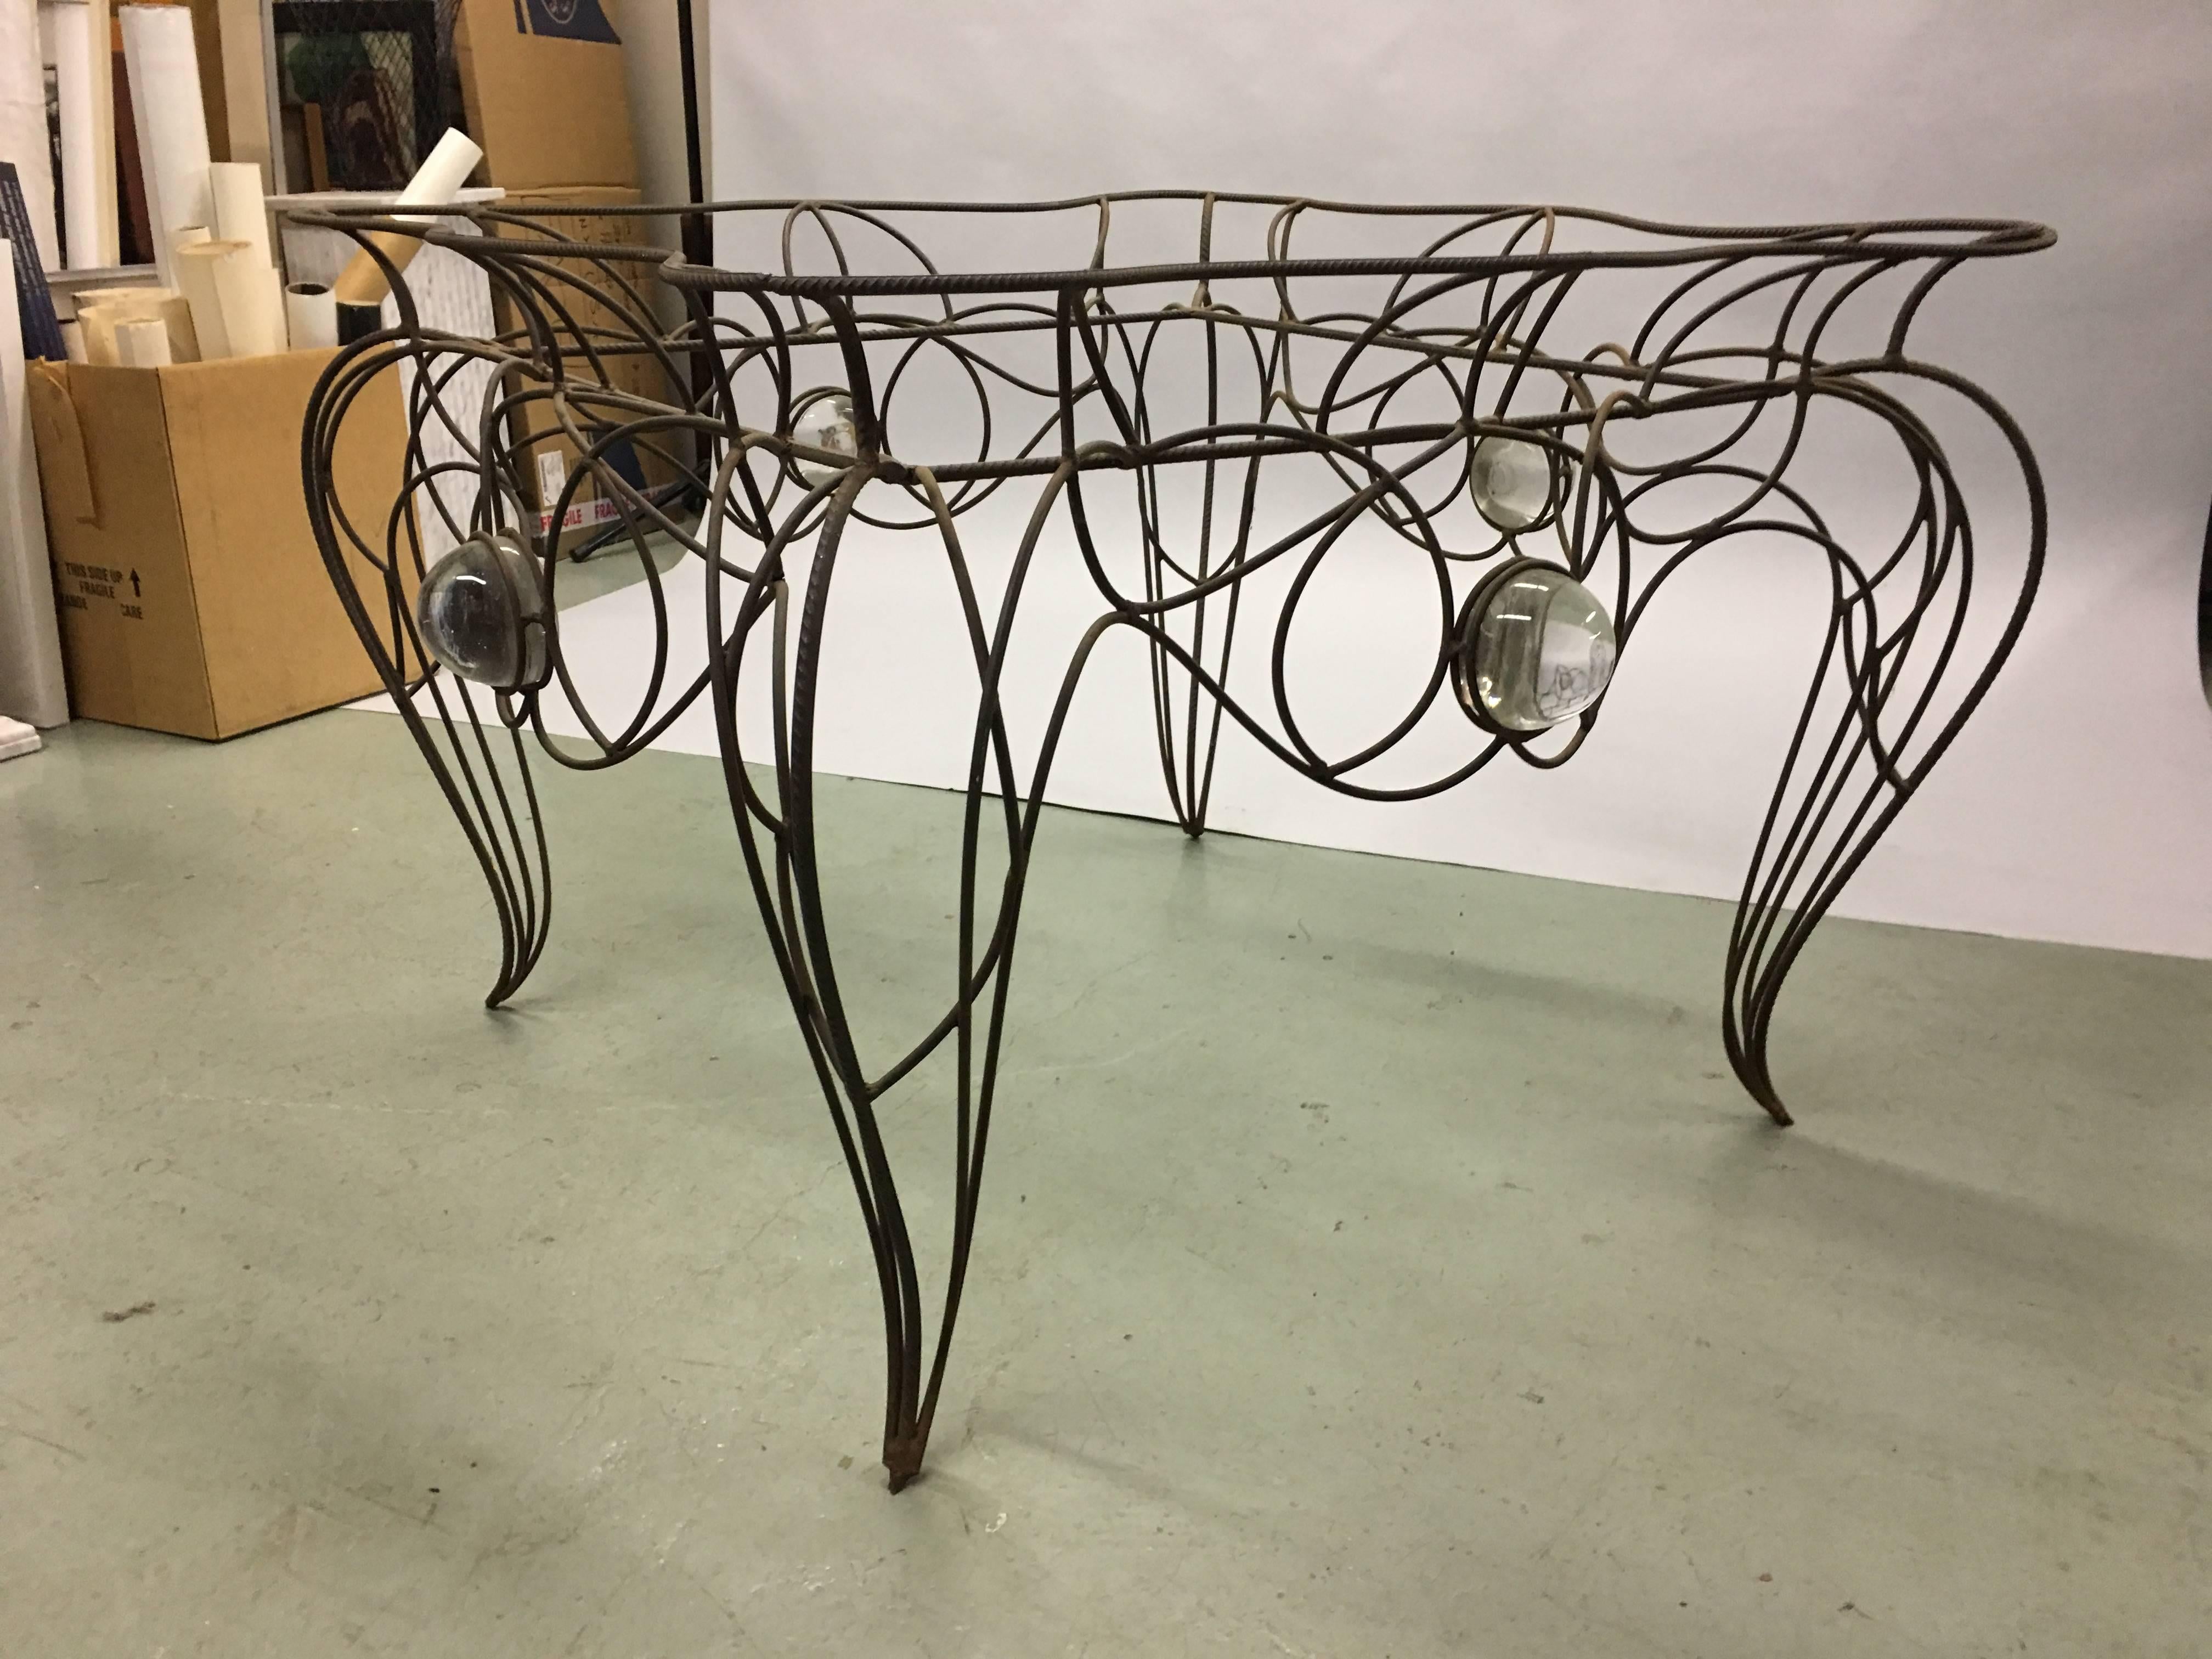 Hand-Crafted Unique Centre Table / Console in Wrought Iron and Glass by Andre Dubreuil, 1986 For Sale